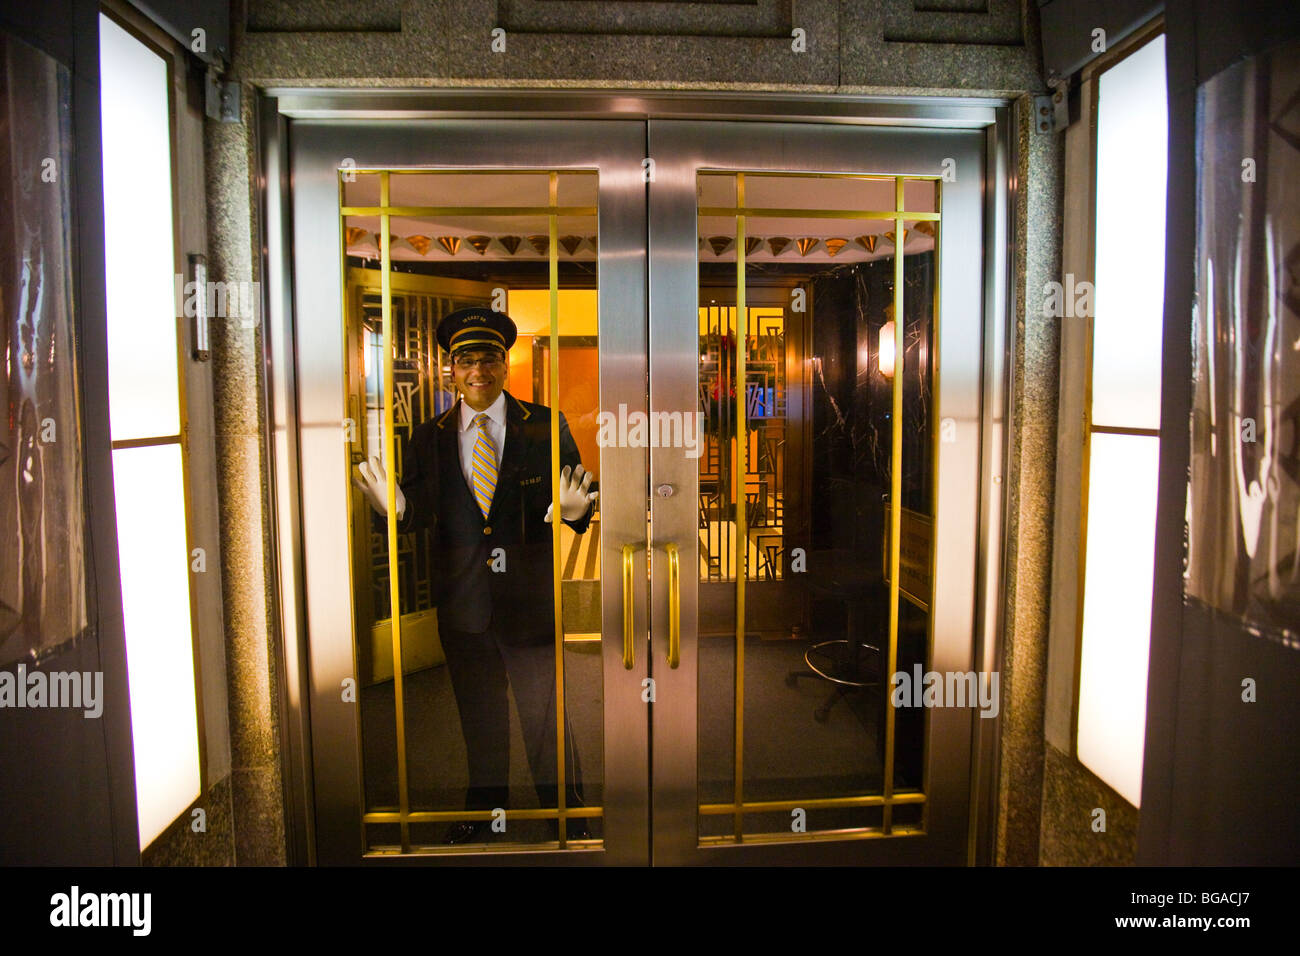 Doorman in the entrance of an Upper East Side apartment building in Manhattan, New York Stock Photo